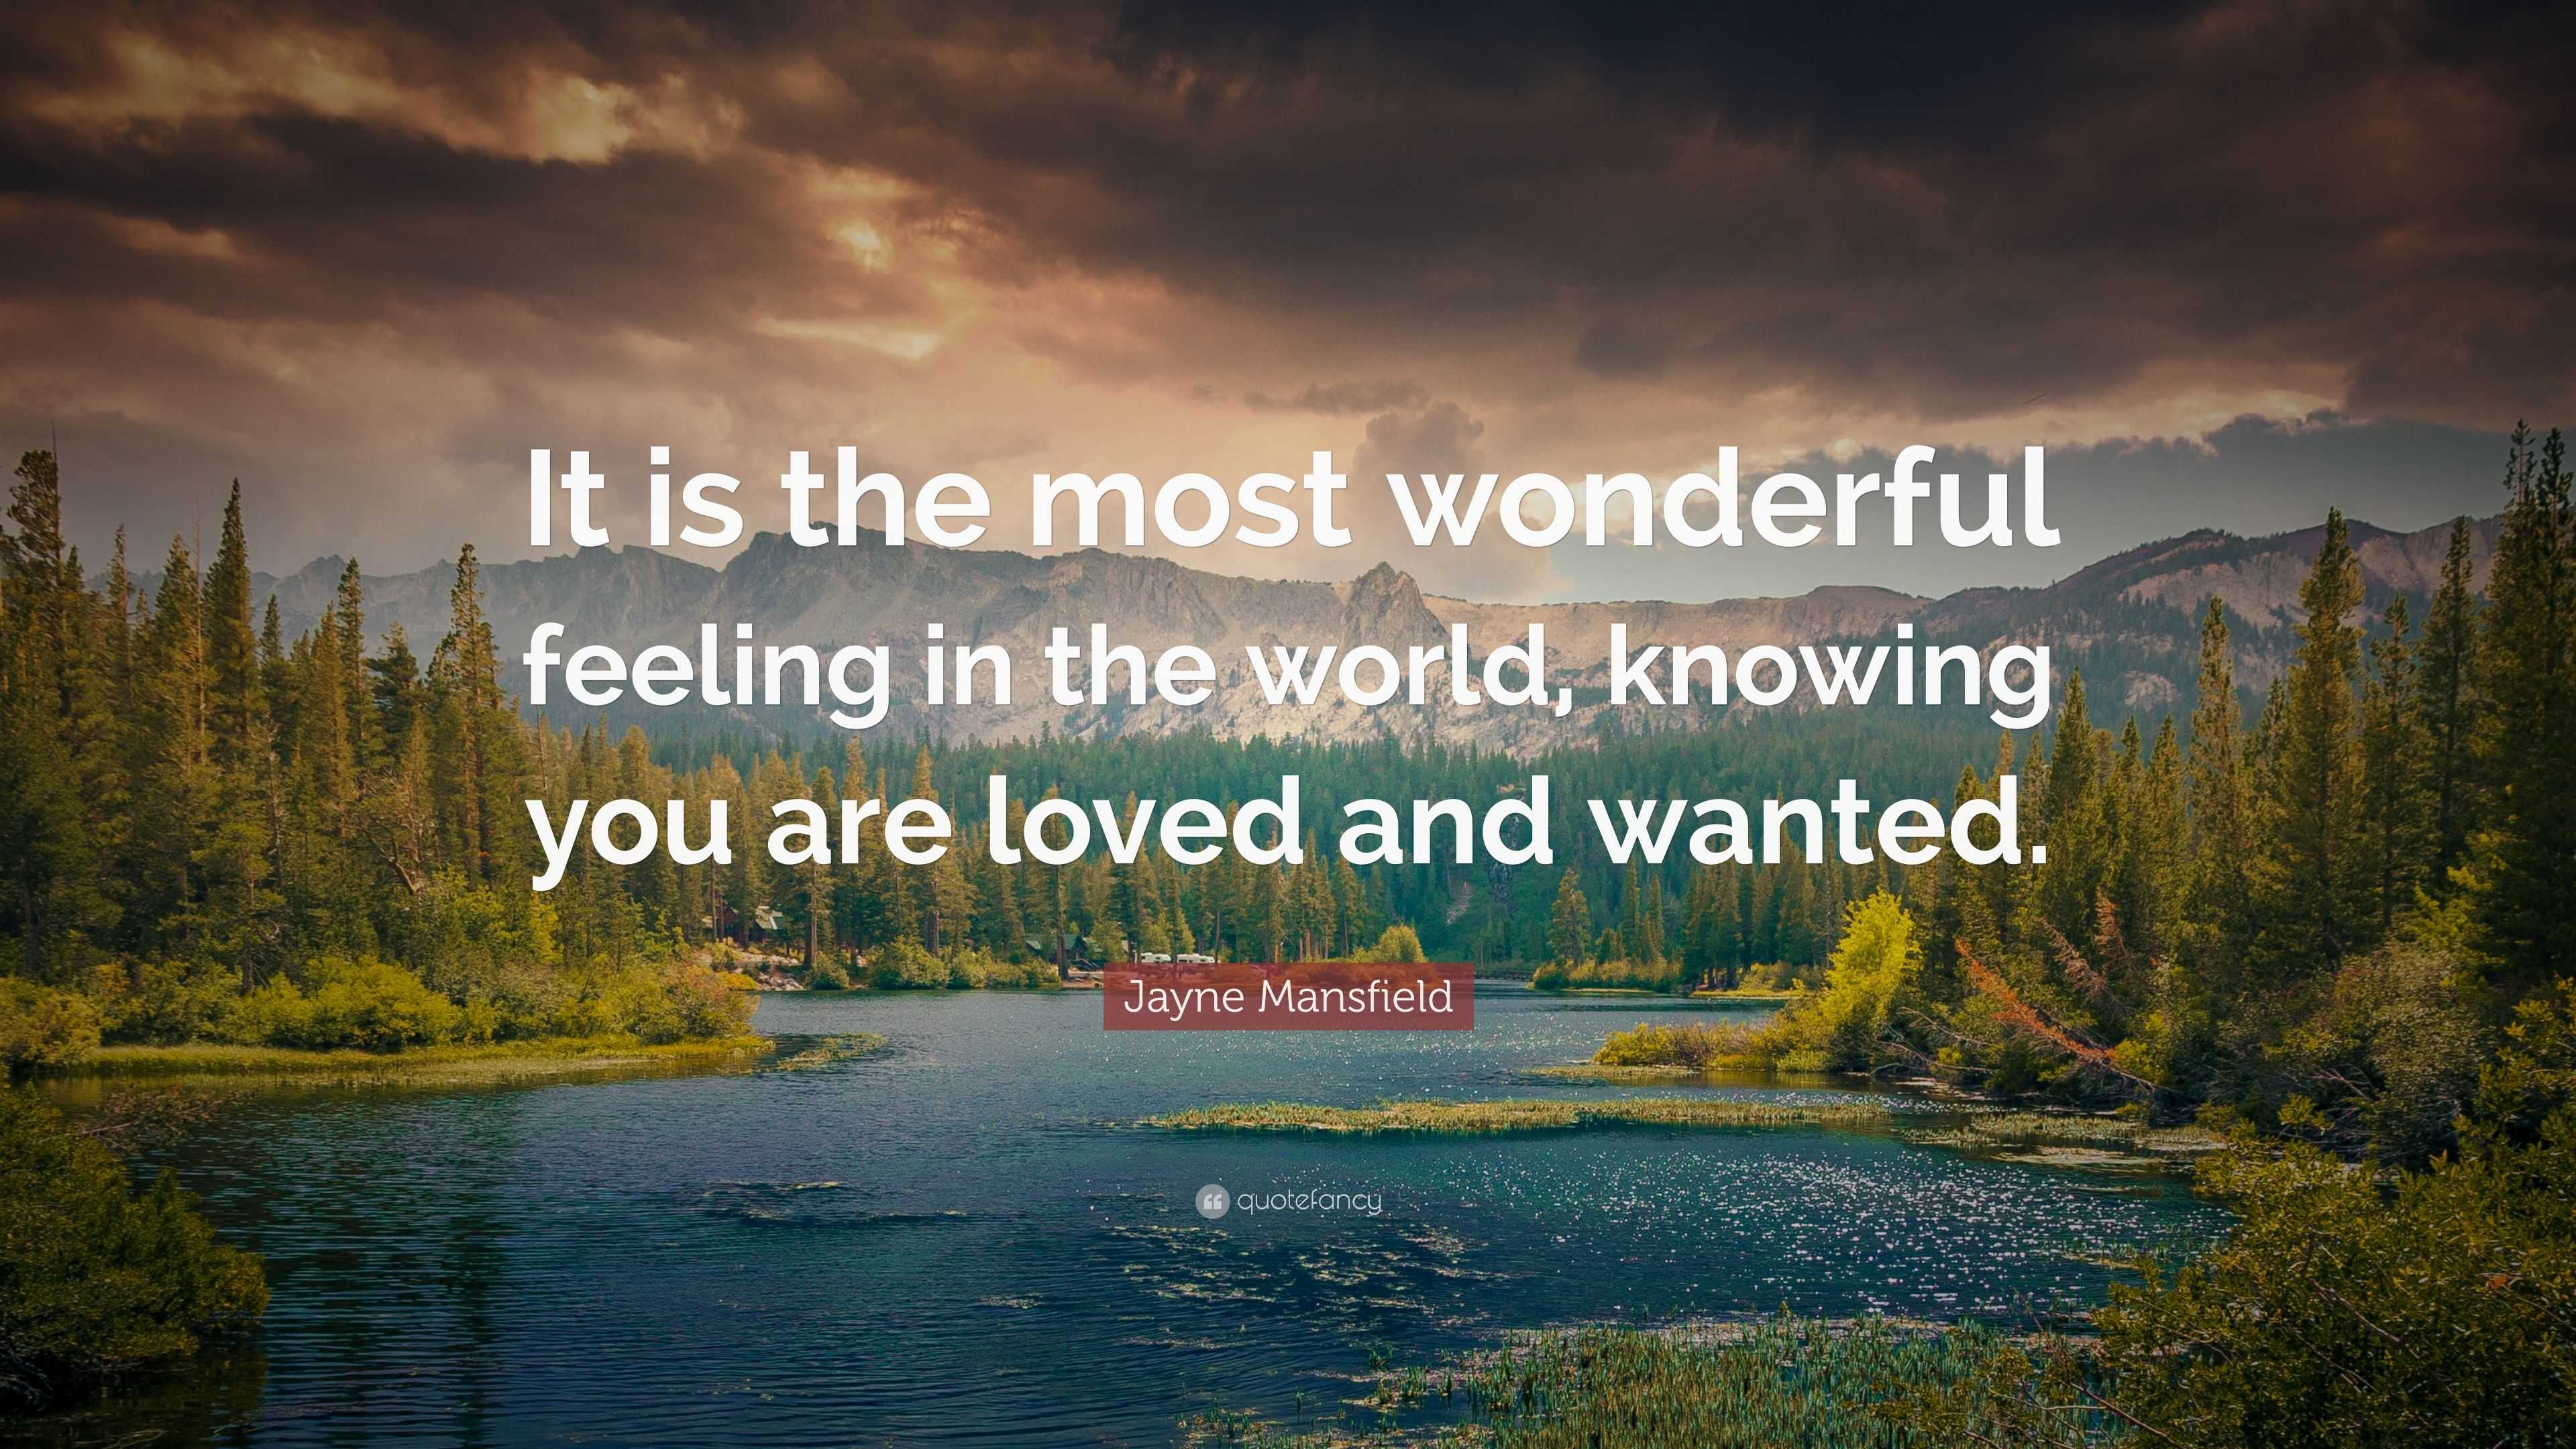 Jayne Mansfield Quote: “It is the most wonderful feeling in the world ...